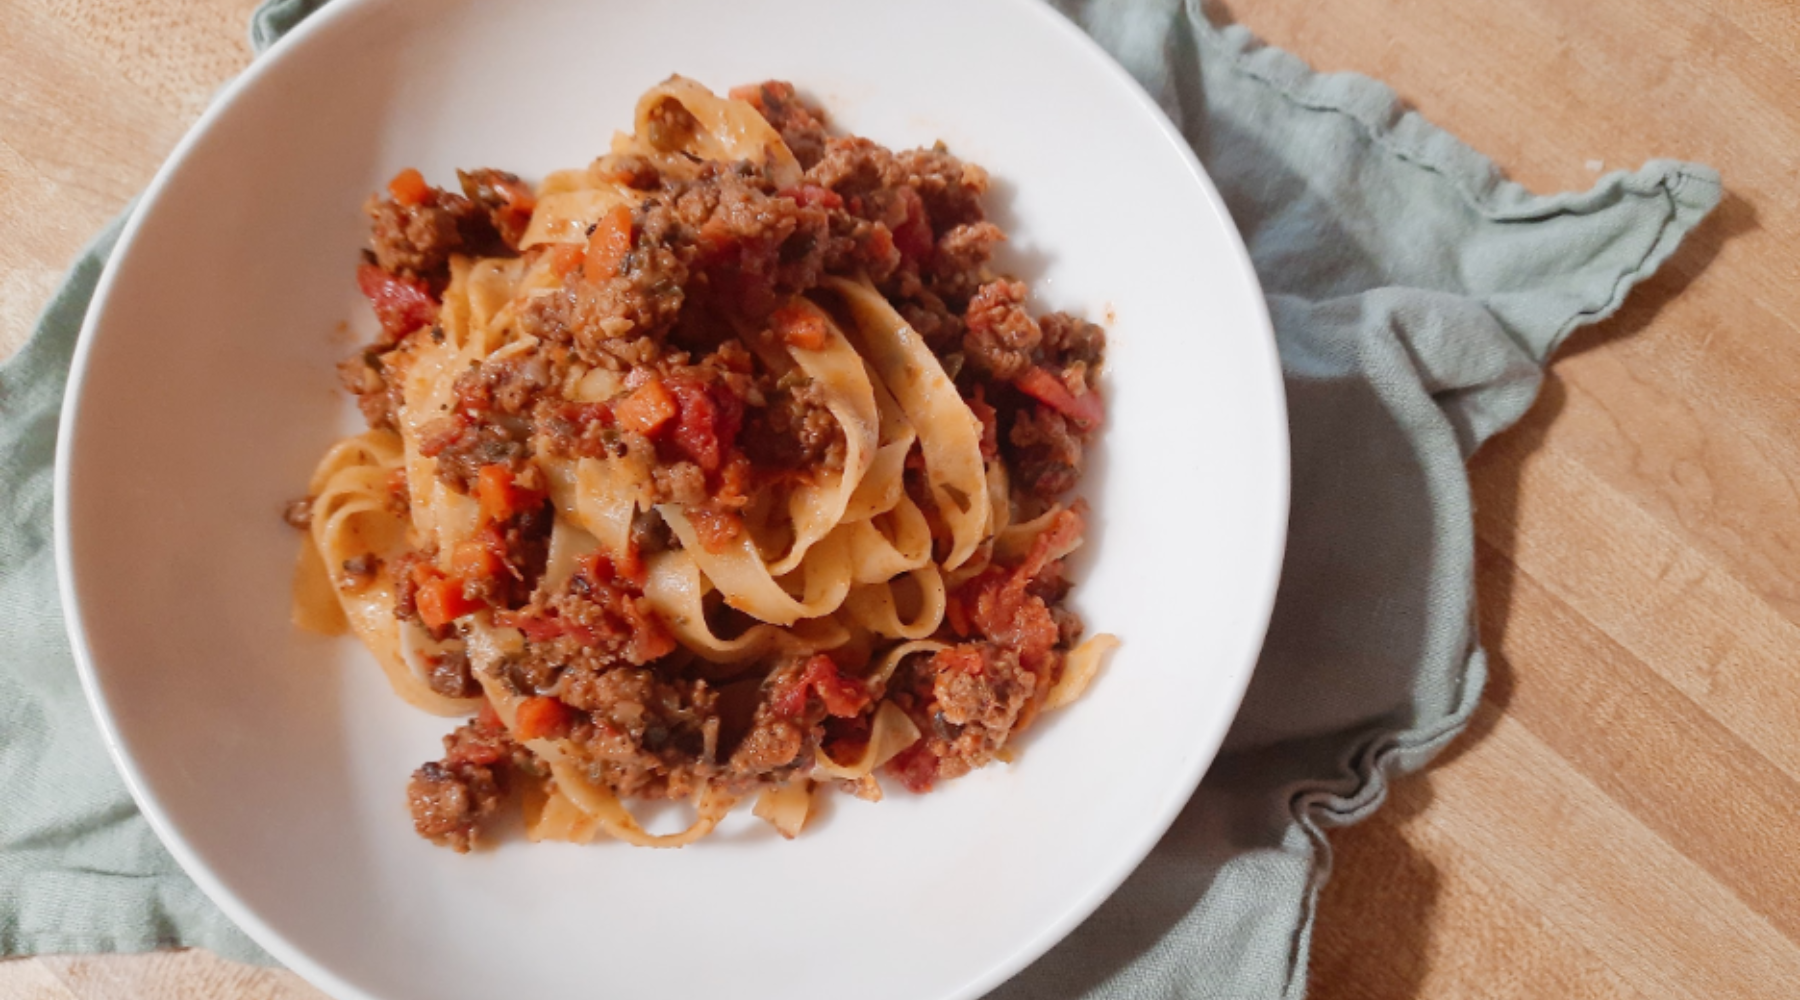 New Italian-inspired goat meat recipe is the perfect comfort food for fall